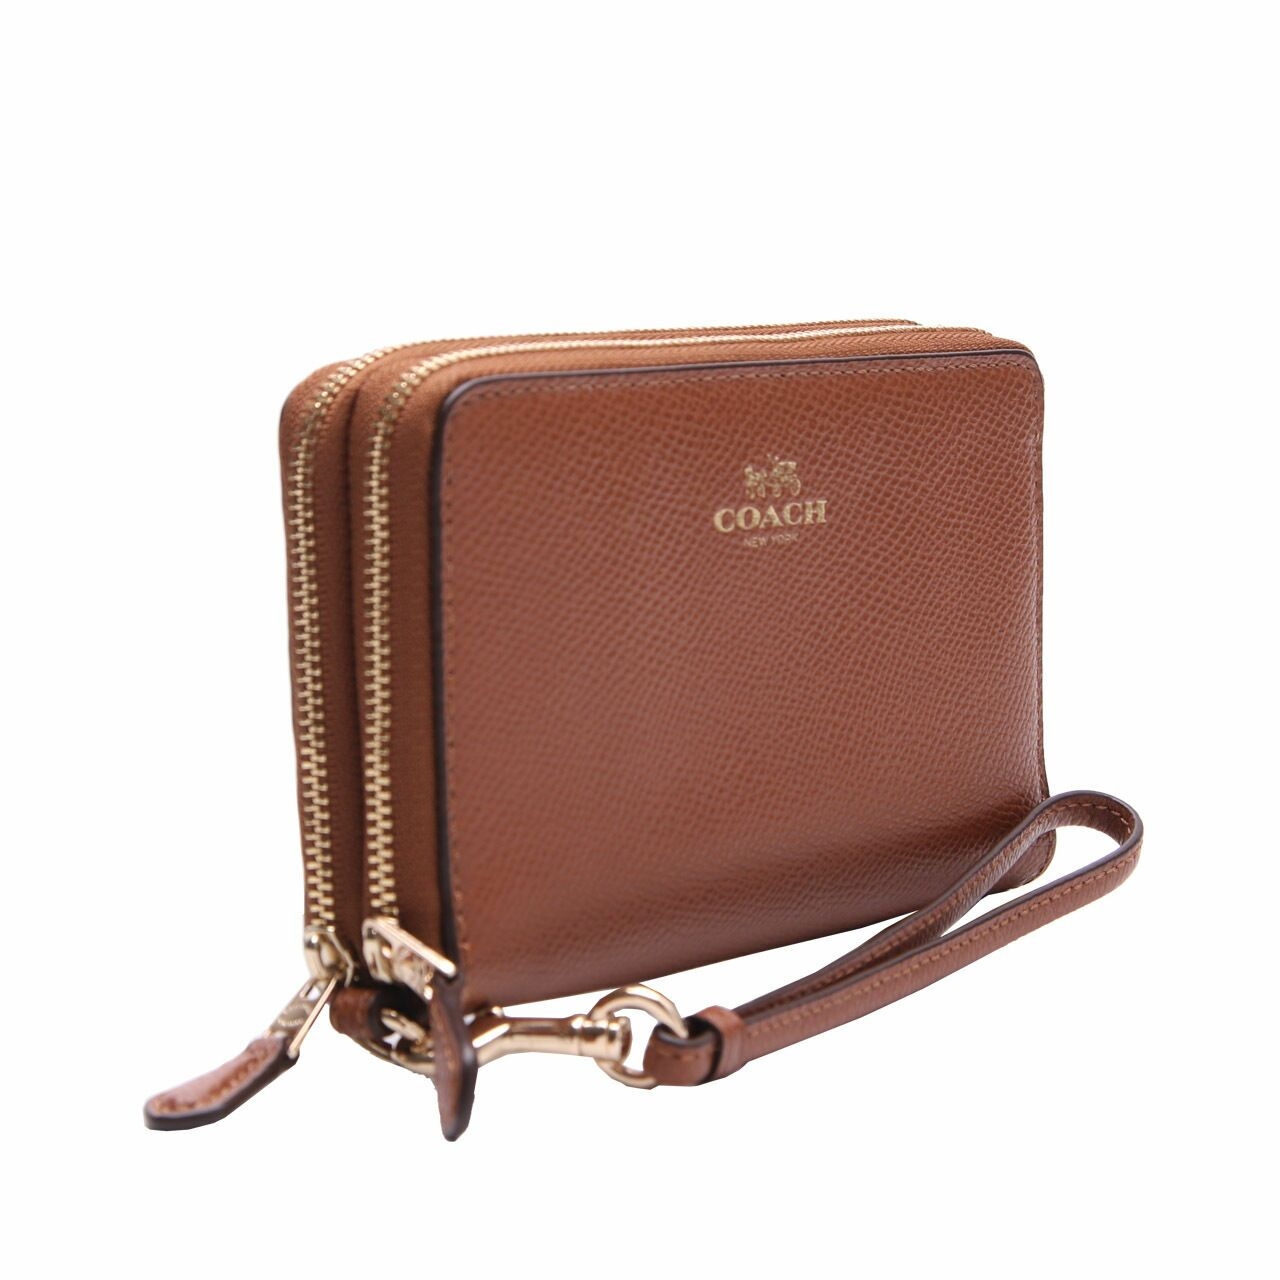 Coach Brown Leather Wallet